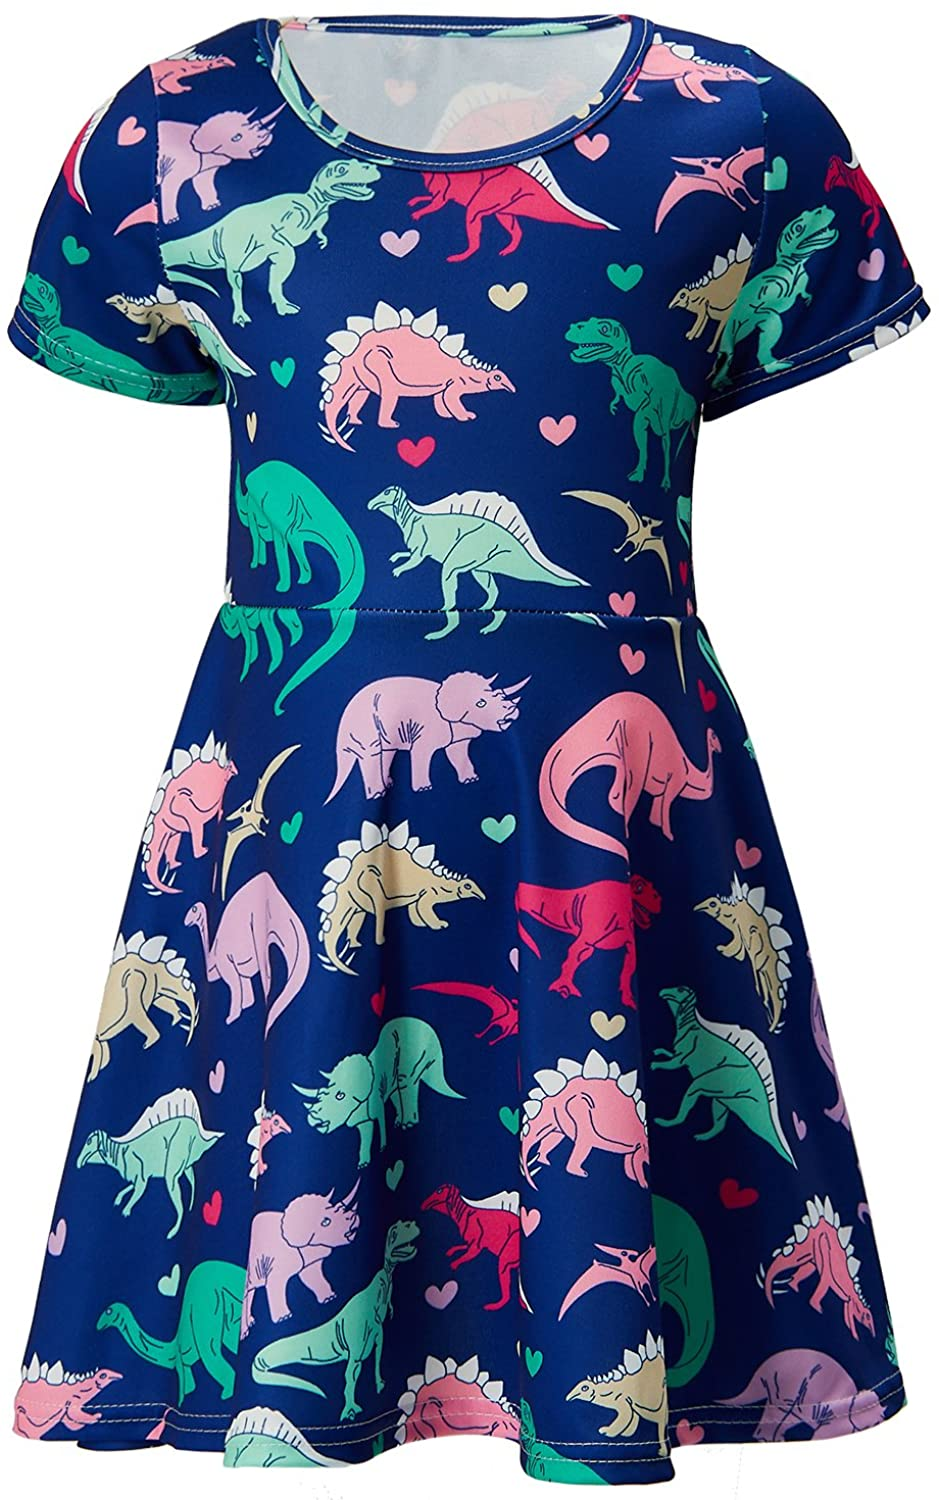  Cute Short Sleeve Dresses for Girls - Perfect for School, Parties, and More!